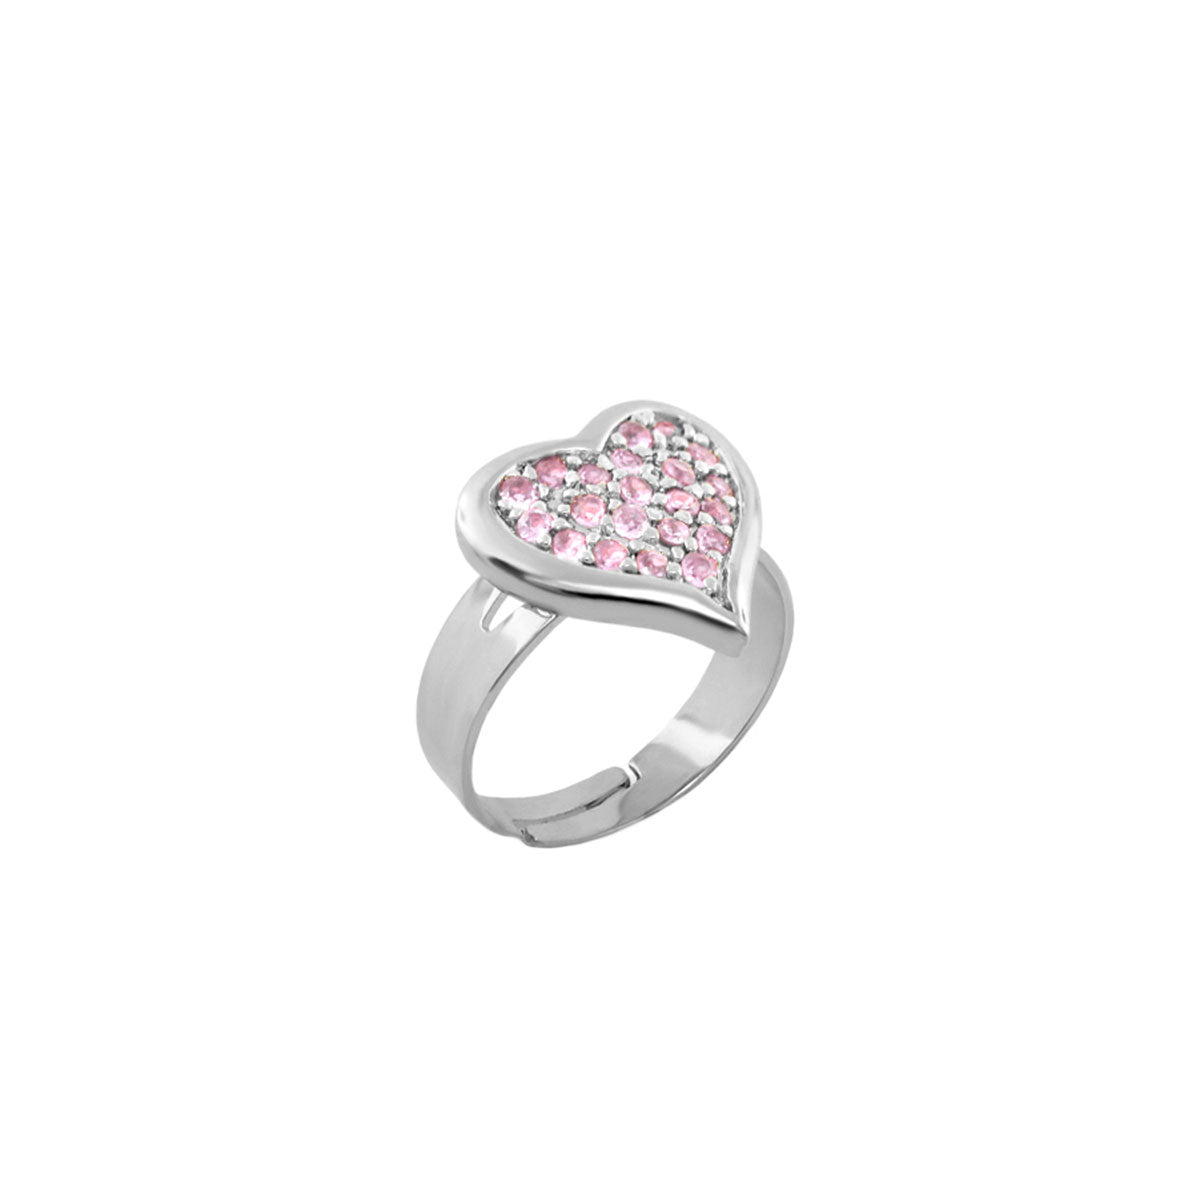 Kids Ring With Heart